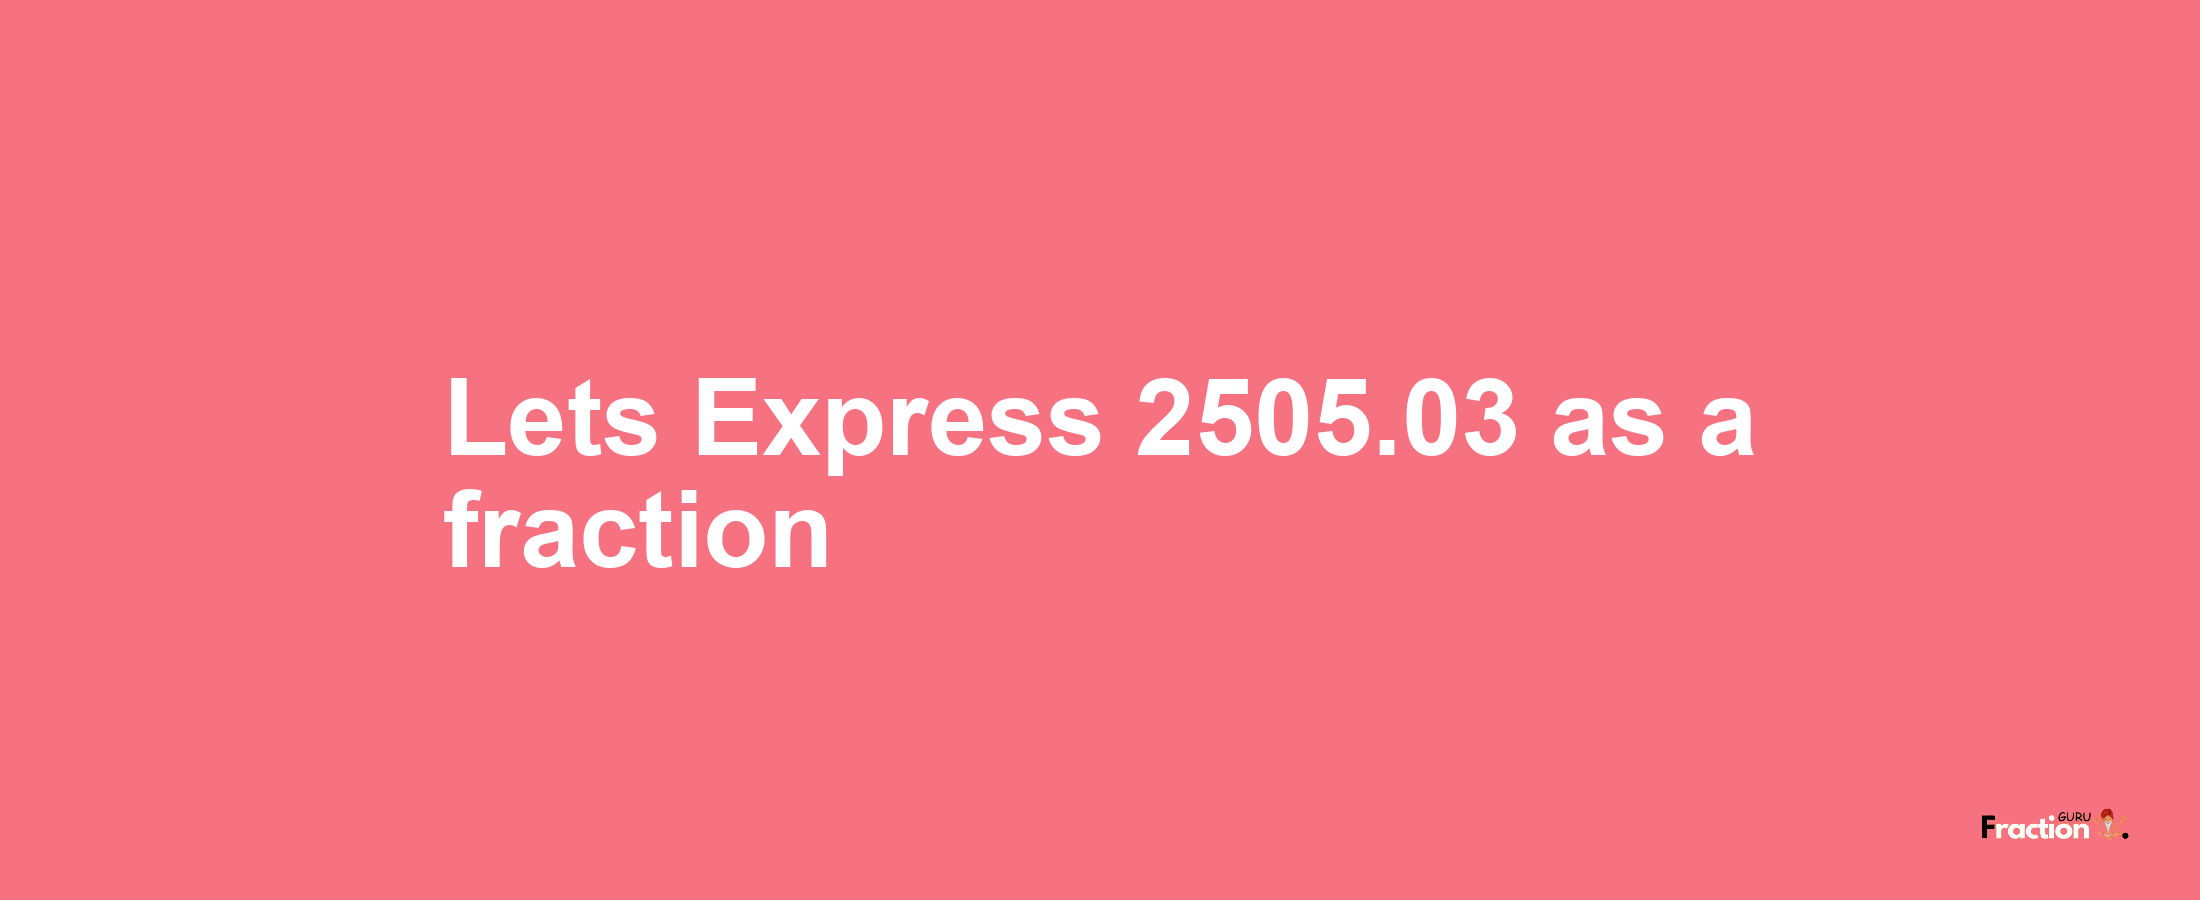 Lets Express 2505.03 as afraction